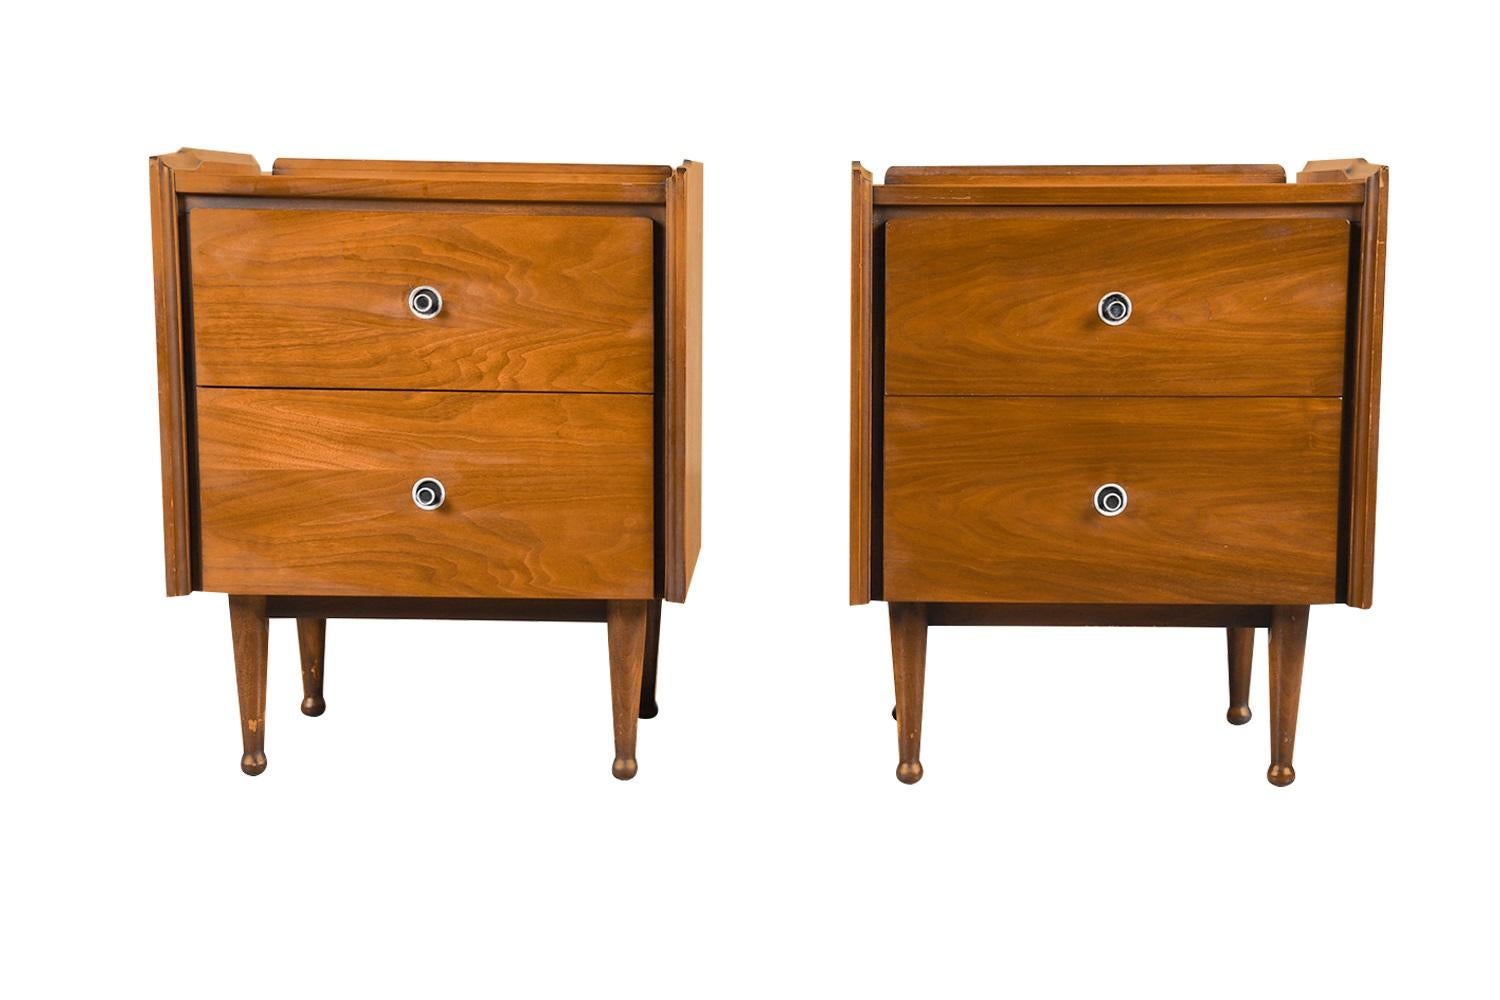 Stunning walnut Mid-Century Modern pair of nightstands for Mainline by Hooker Furniture Company circa 1960’s. A beautiful example of Mid-Century craftsmanship, each features sculpted raised backsplash and side edges above 2 drawers. Manufacturer’s